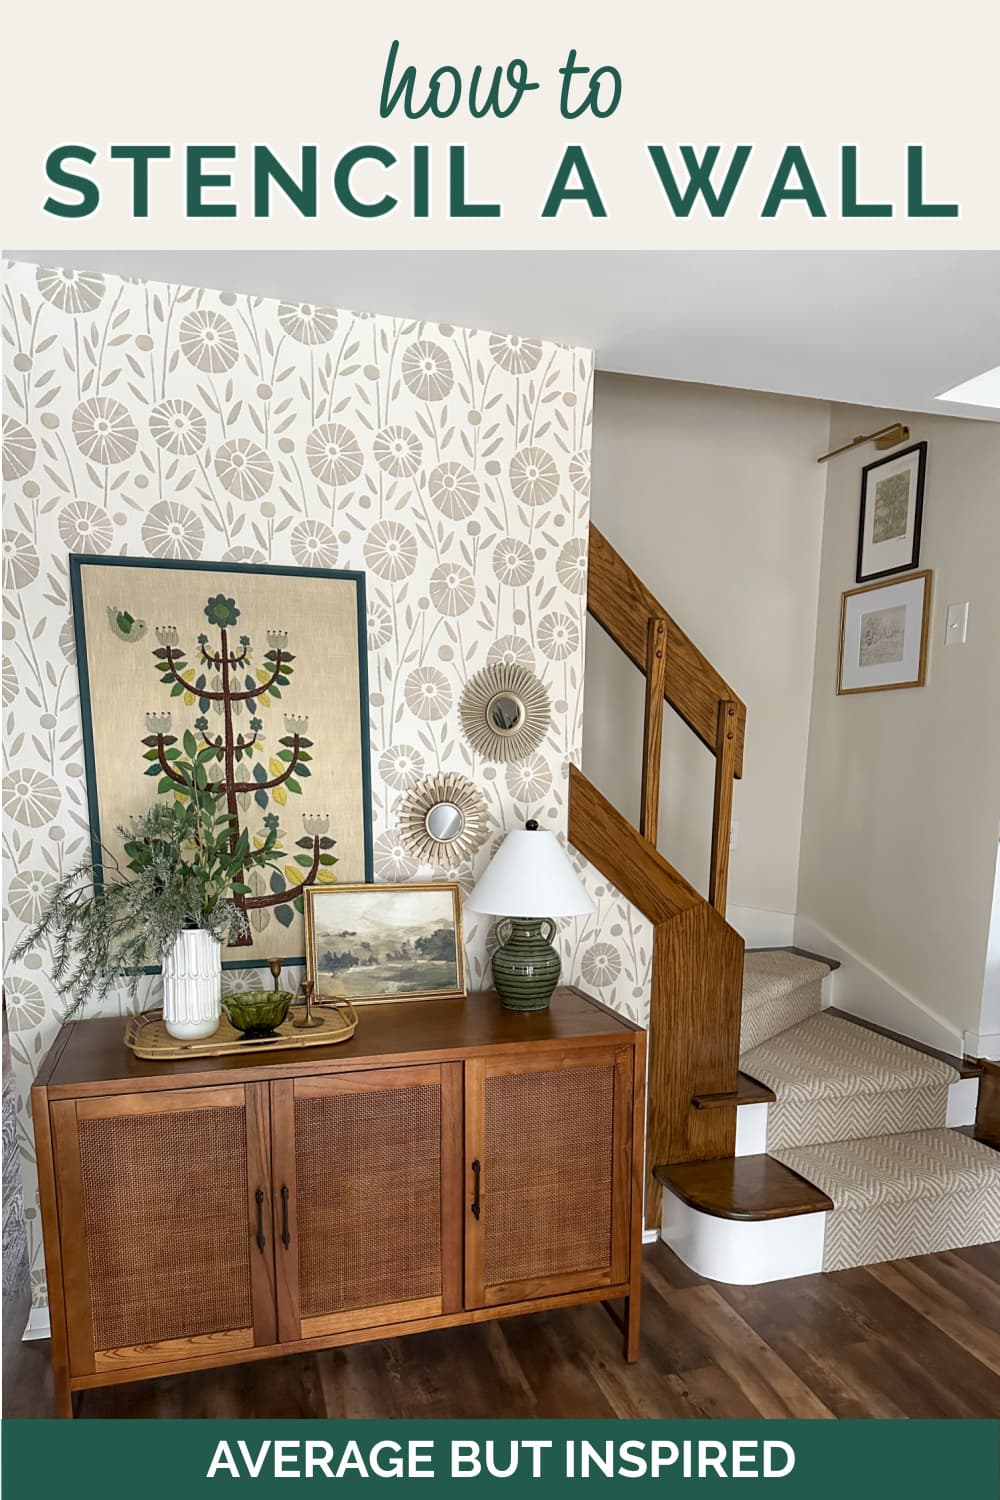 Learn how to stencil a wall to look like wallpaper with the helpful tips in this post. This wall stencil is a large floral pattern in neutral colors to give it a sophisticated look.